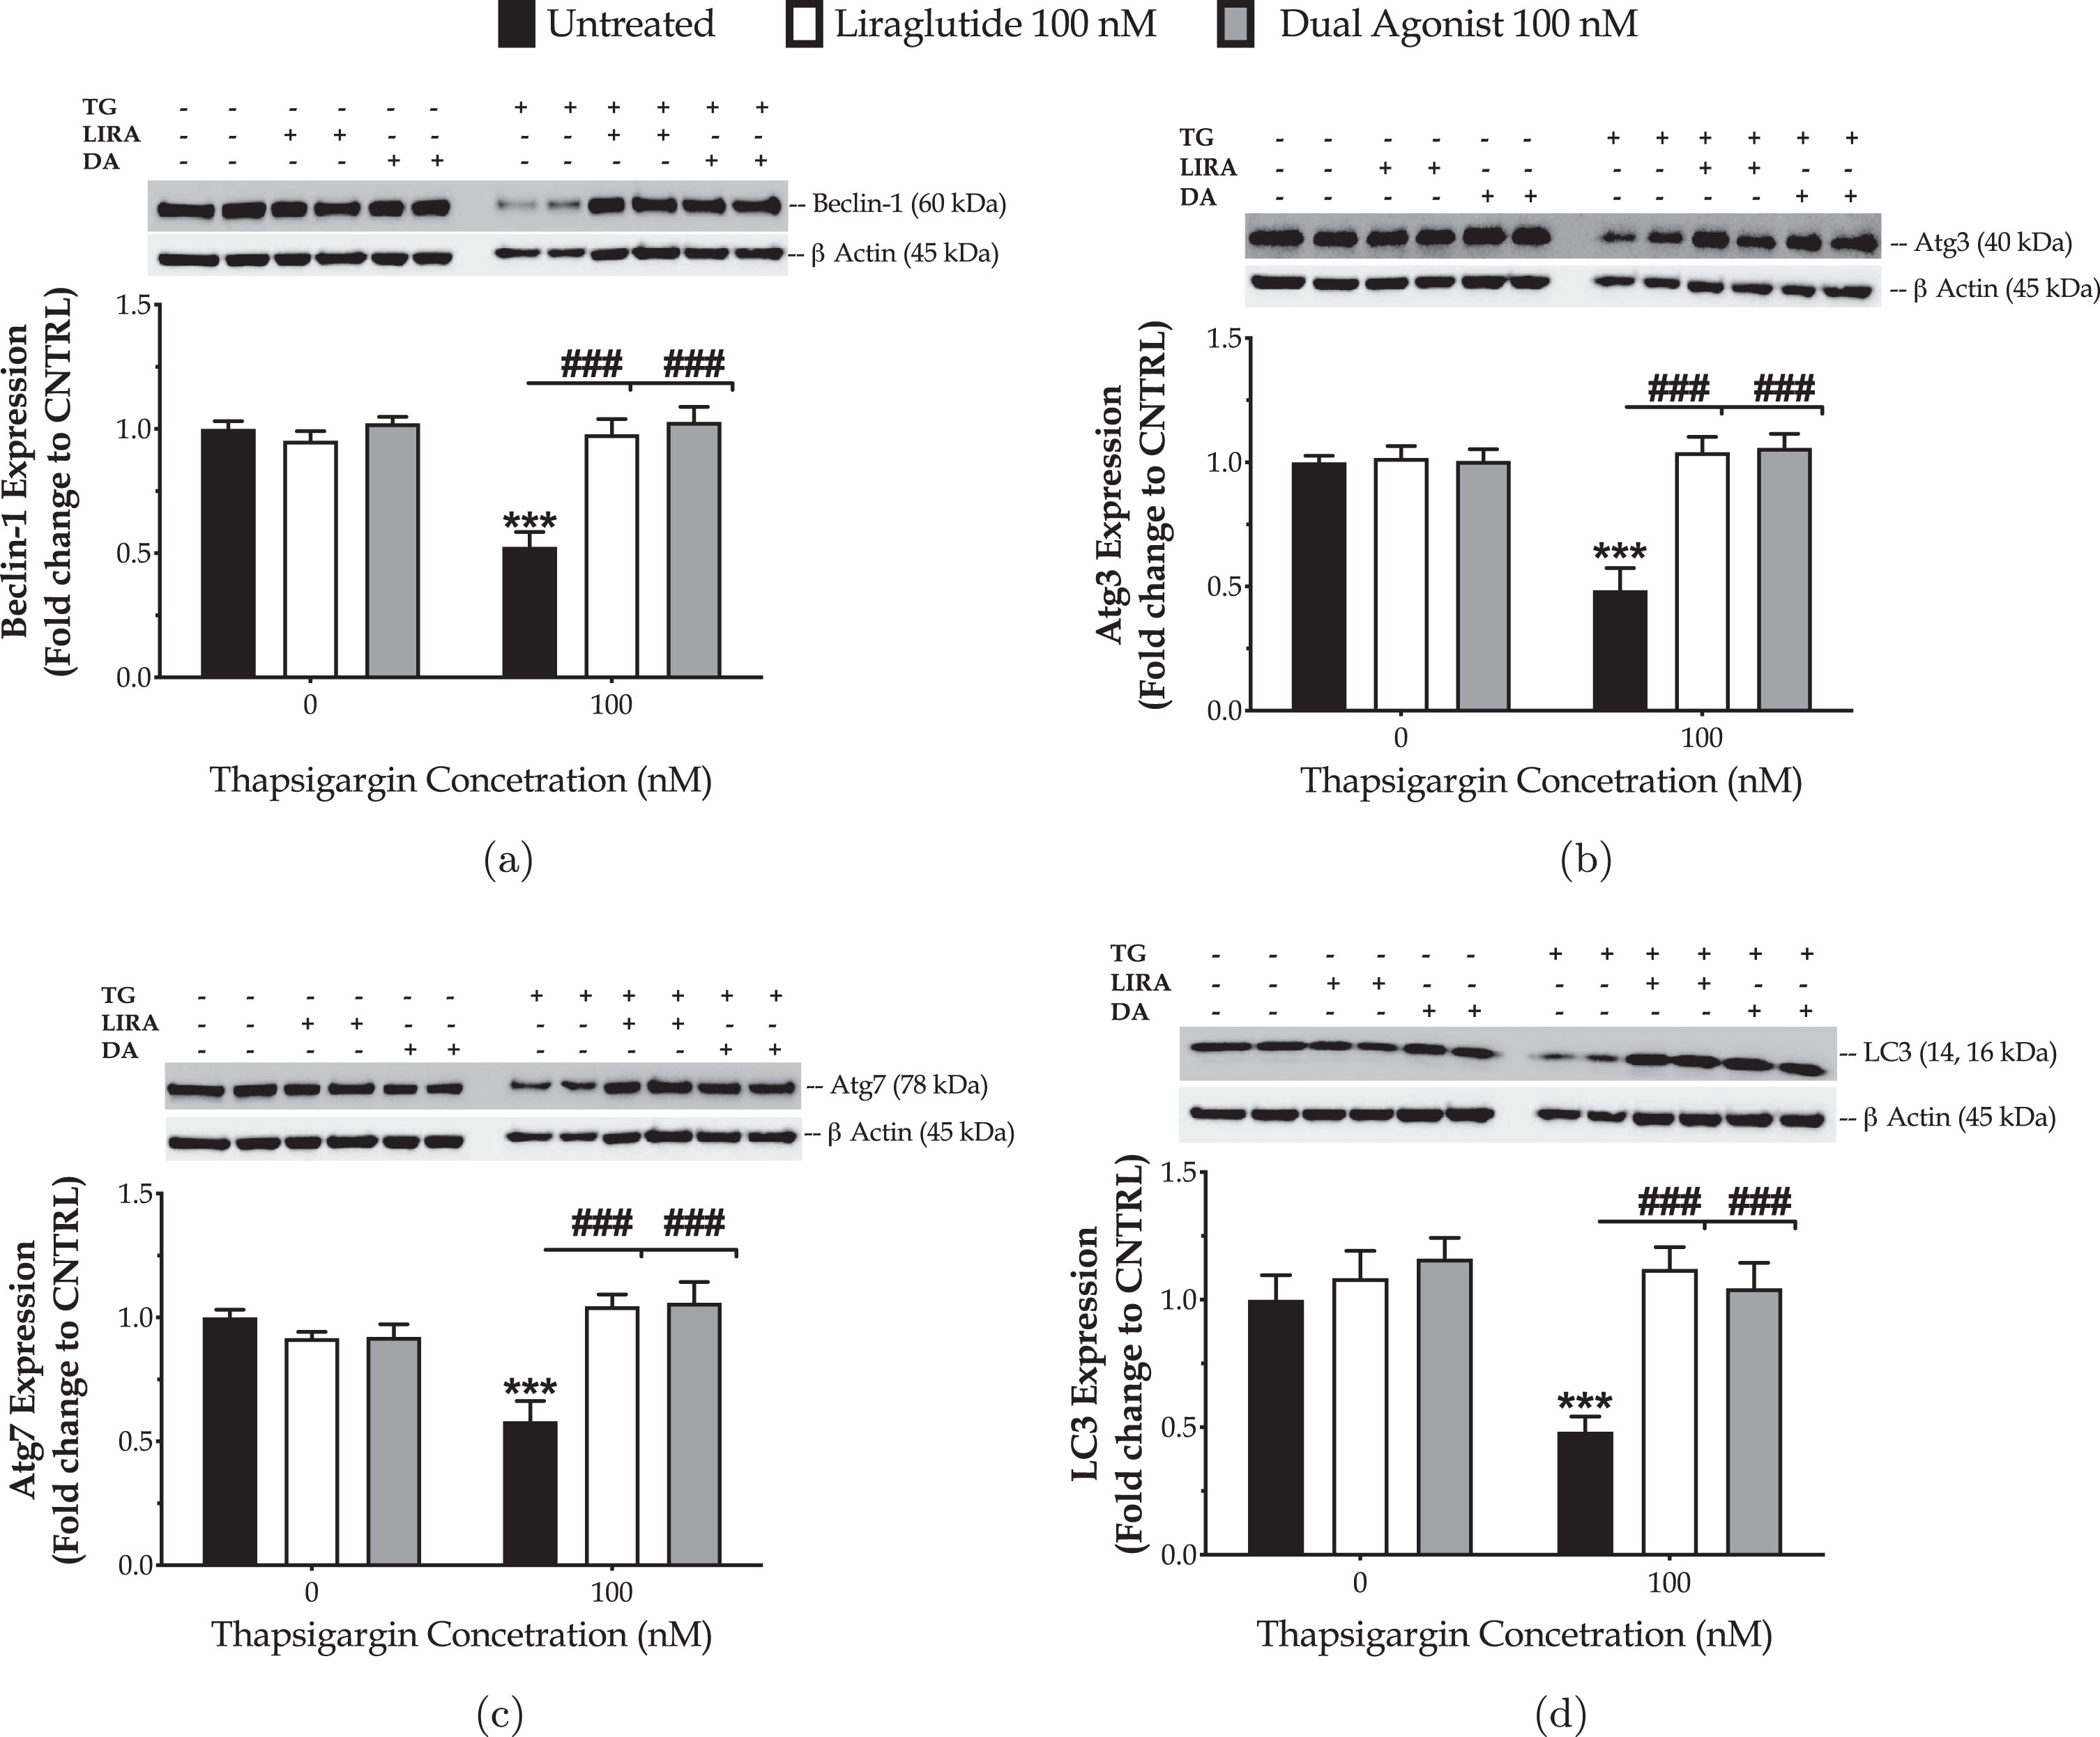 Liraglutide (LIRA) and the GLP-1/GIP dual agonist (DA) normalize the suppressed expression of core autophagy-related proteins (Atg) proteins for autophagosome formation and maturation upon chronic ER stress. On d 6 of the differentiation period, dopaminergic-like neurons from the human LUHMES cell line were treated with 0 and 100 nM of thapsigargin (TG) in the presence or absence of each incretin tested for 16 h. Neurone were harvested, and the expression of beclin-1 (a), Atg3 (b), Atg7 (c) and of LC3 (d) were determined by western blotting. β-Actin was used as the loading control in our quantification. Loading controls for a and c are the same. Each bar represents the mean±SEM from five independent experiments. Data expressed as fold change to the control (CNTRL; unstressed/untreated conditions) and processed with two-way ANOVA, followed by post hoc Bonferroni’s multiple comparison t-test: ***p≤0.001 compared to CNTRL; ###p≤0.001 compared to the TG-stressed neurons.